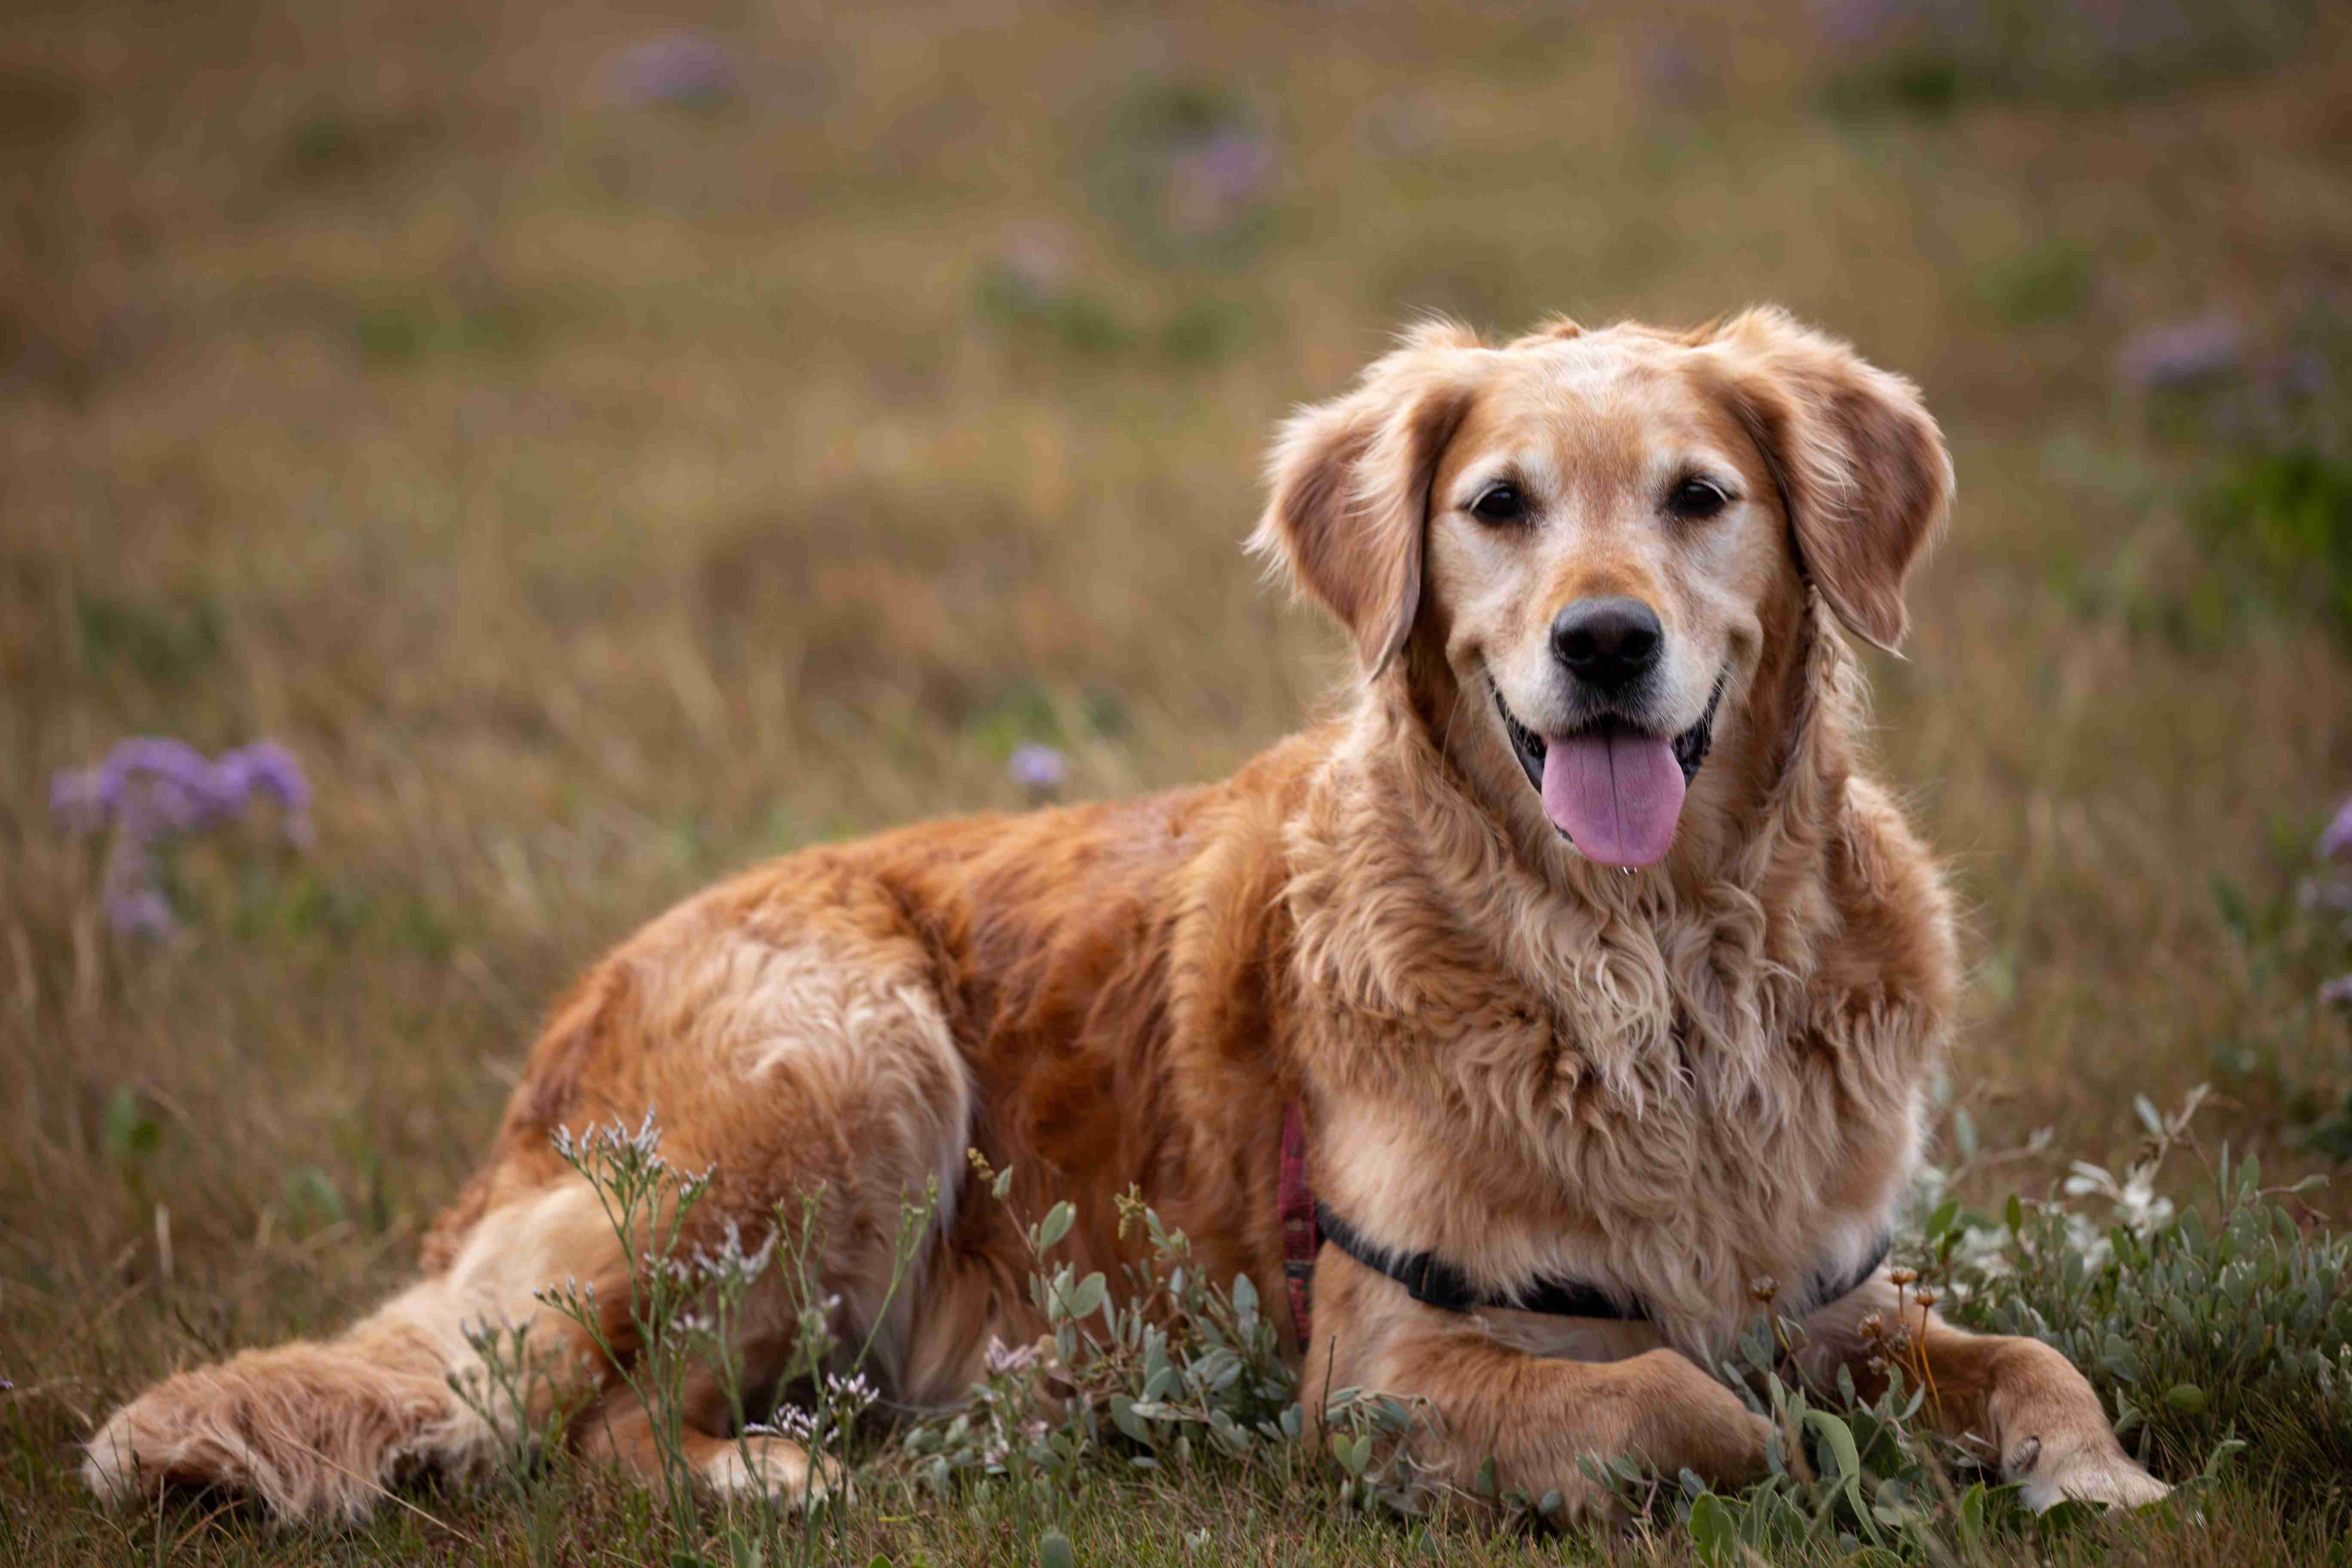 How can I prevent dental issues in my Golden Retriever?